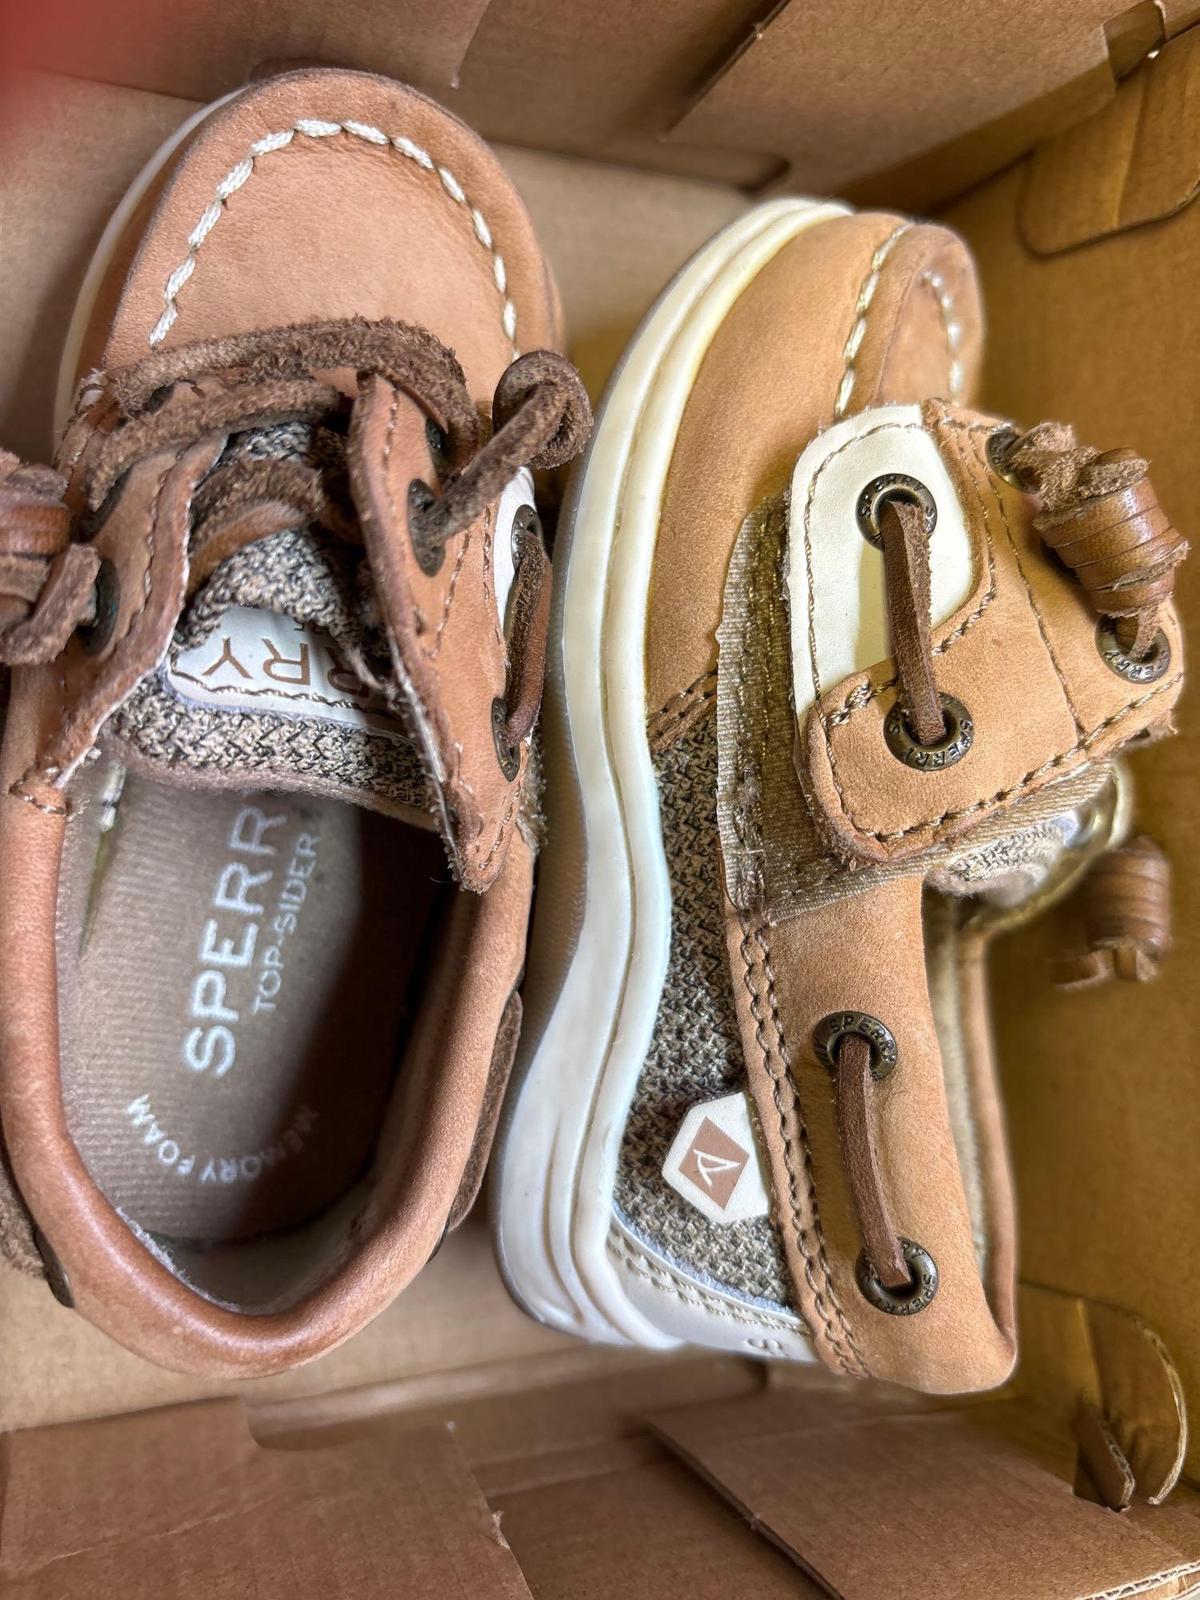 Sperry top sider size 5M girl shoe